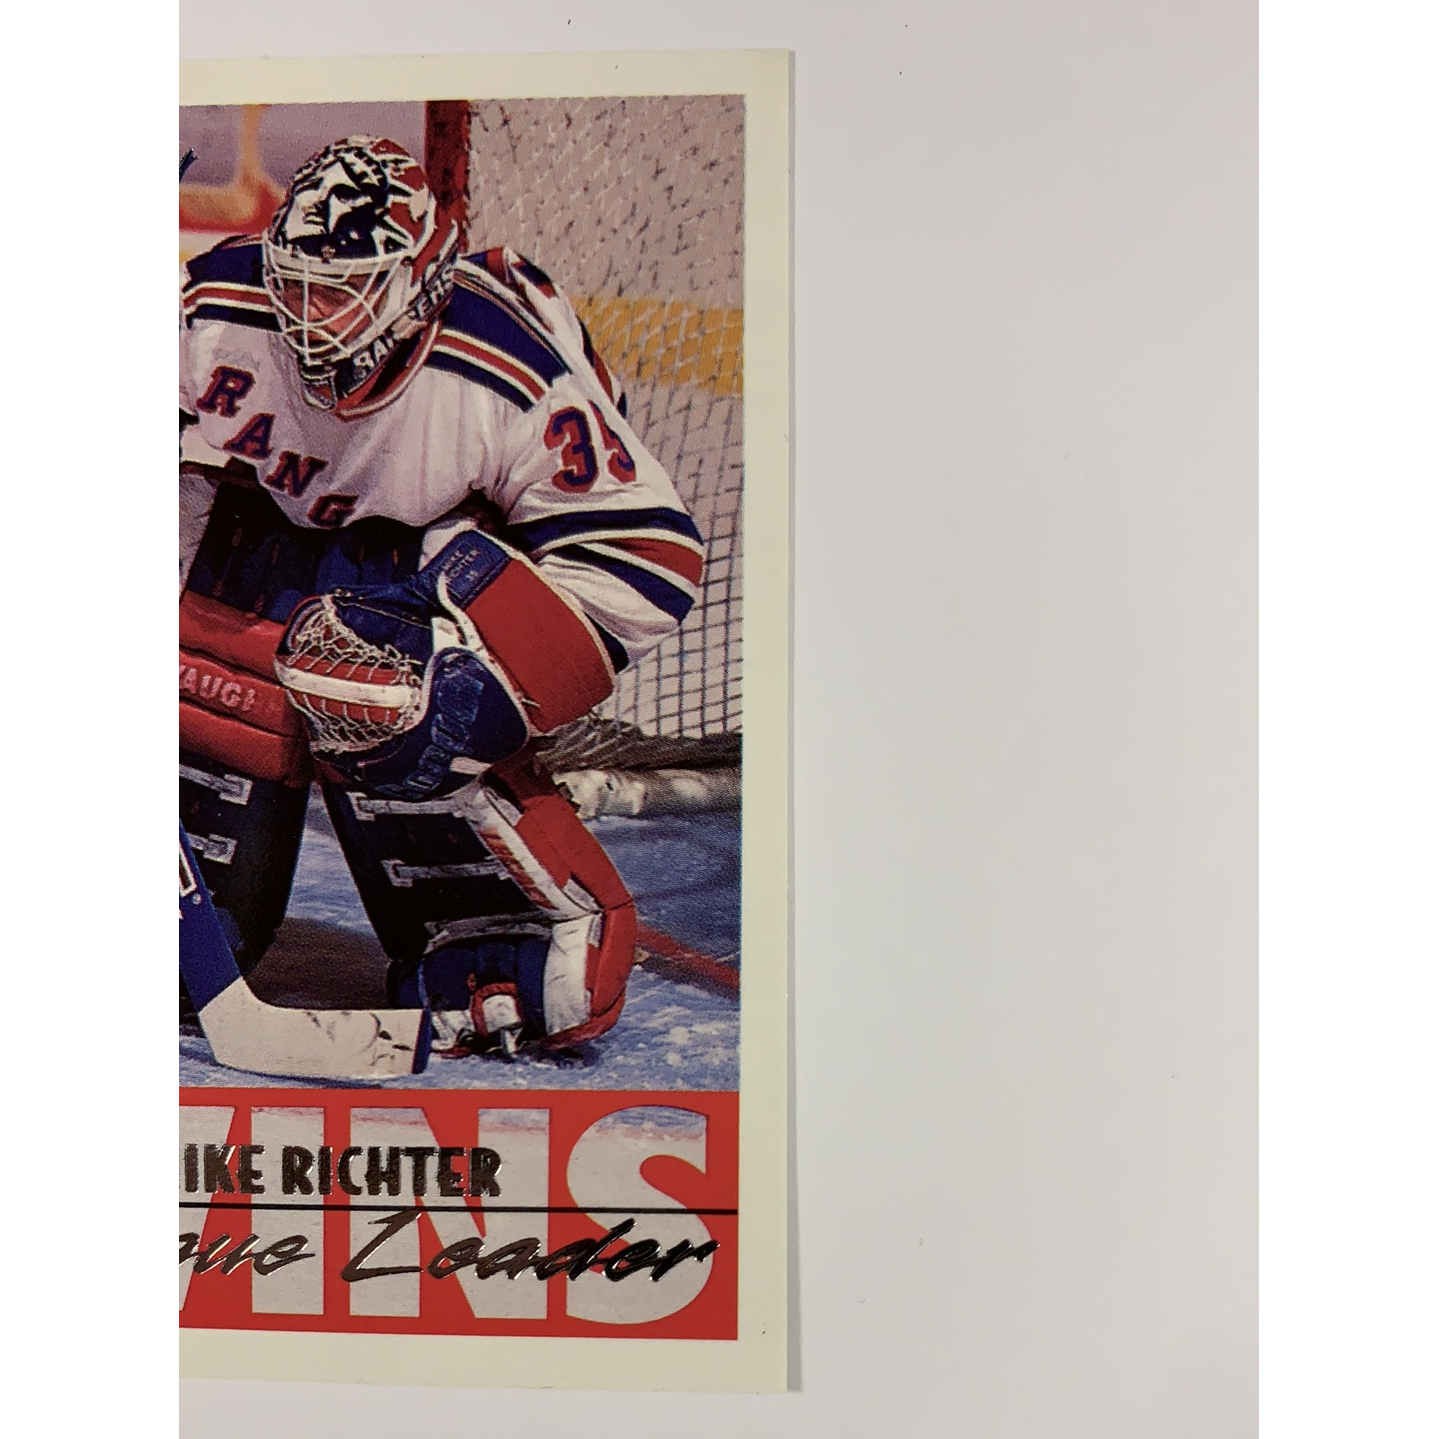  1994 Topps Mike Richter Wins Leader  Local Legends Cards & Collectibles